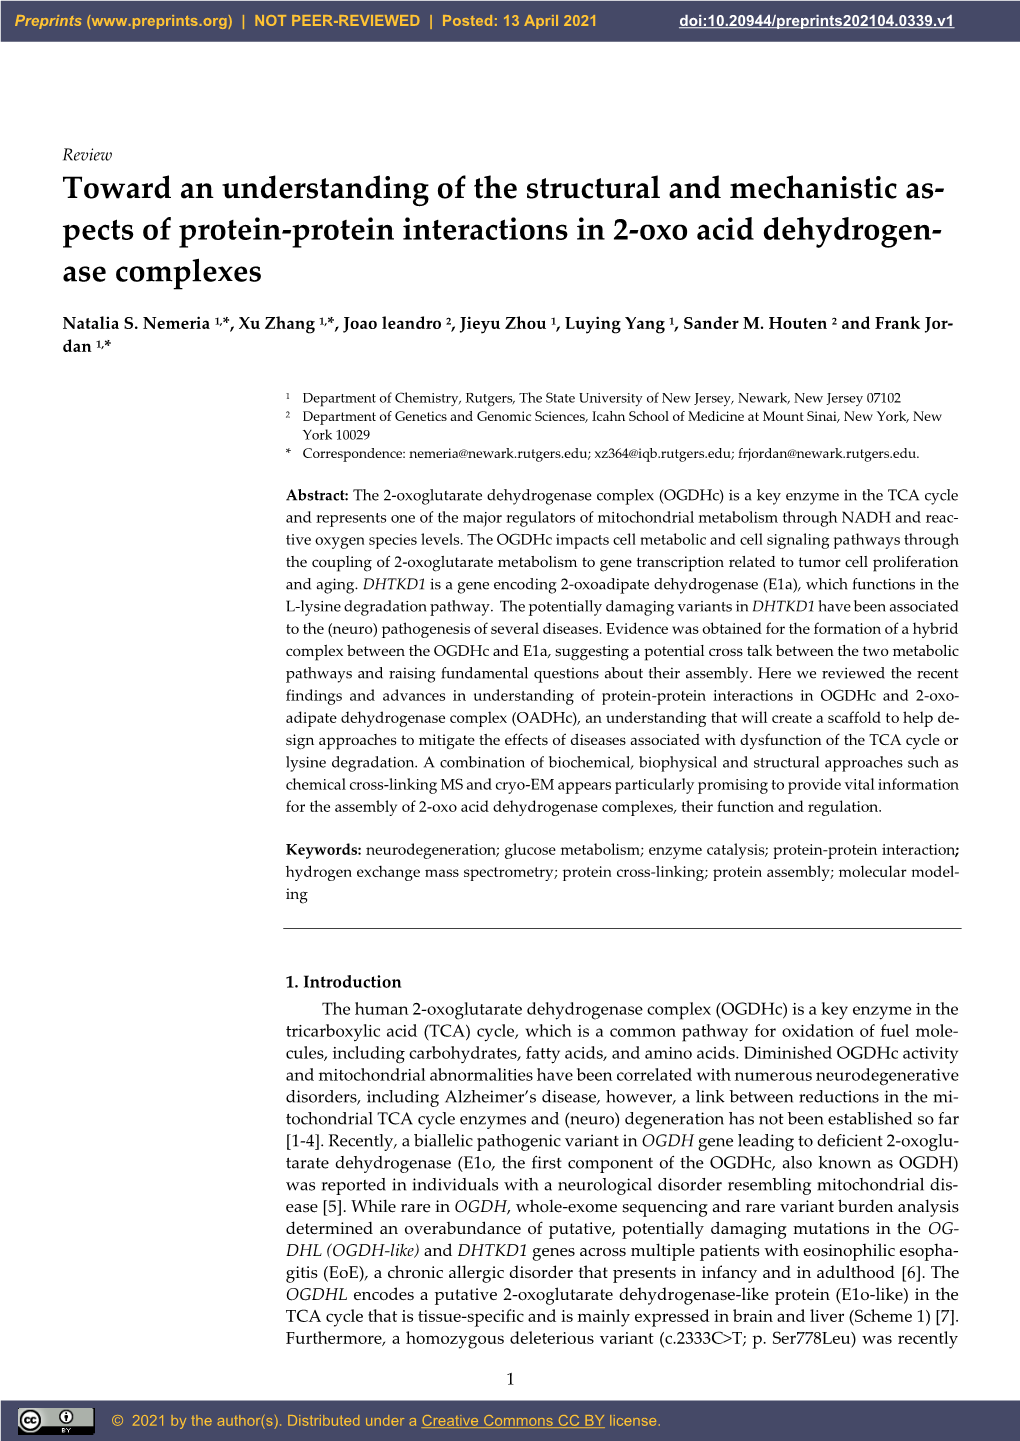 Pects of Protein-Protein Interactions in 2-Oxo Acid Dehydrogen- Ase Complexes